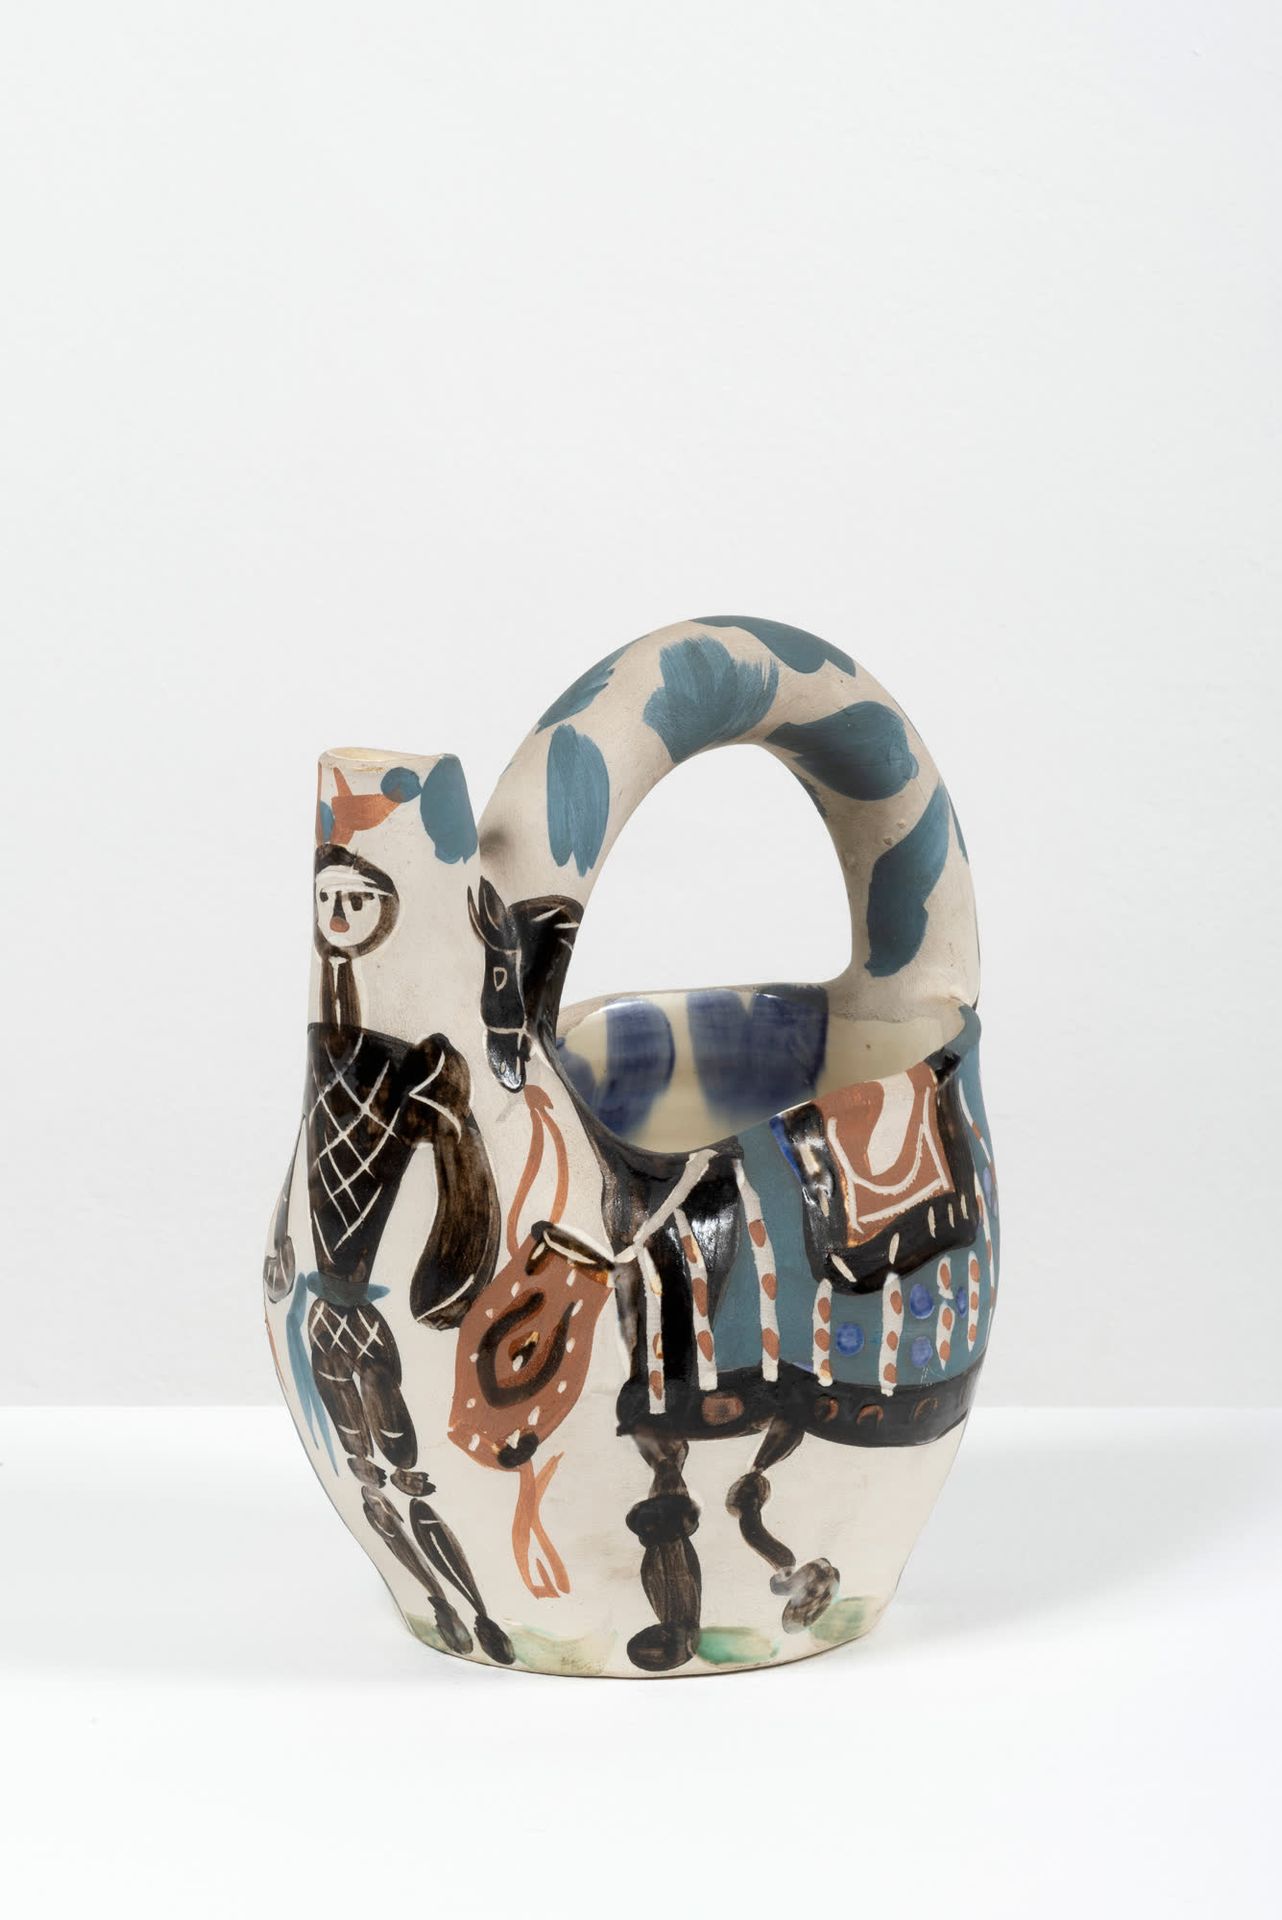 Pablo Picasso (1881-1973) Rider and Horse, 1952.
Ceramic jug with handle and pai&hellip;